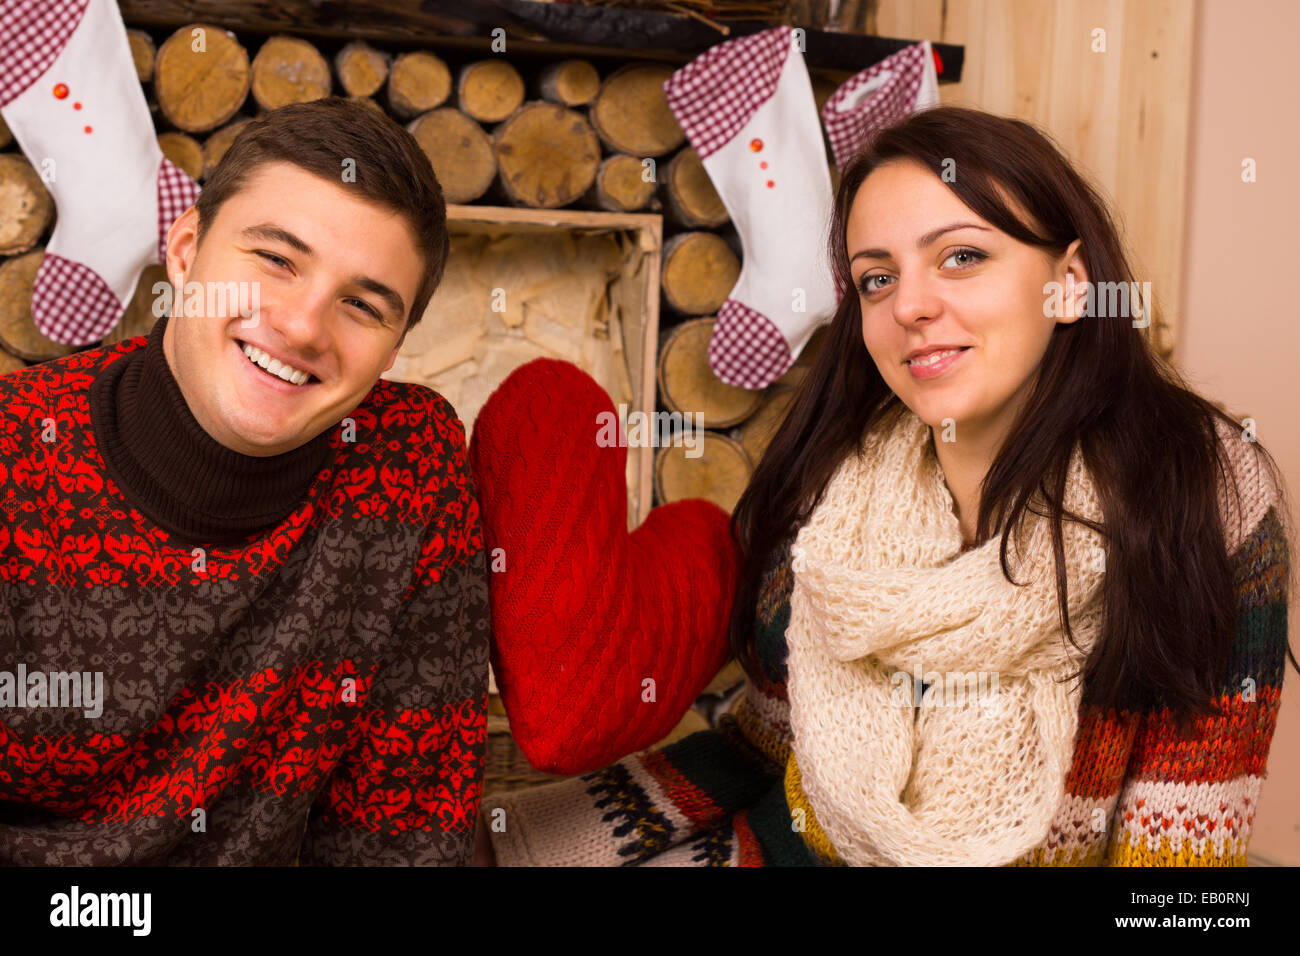 Romantic young couple celebrating Christmas in a rustic wooden cabin decorated with traditional Xmas stockings and a big red heart. Stock Photo